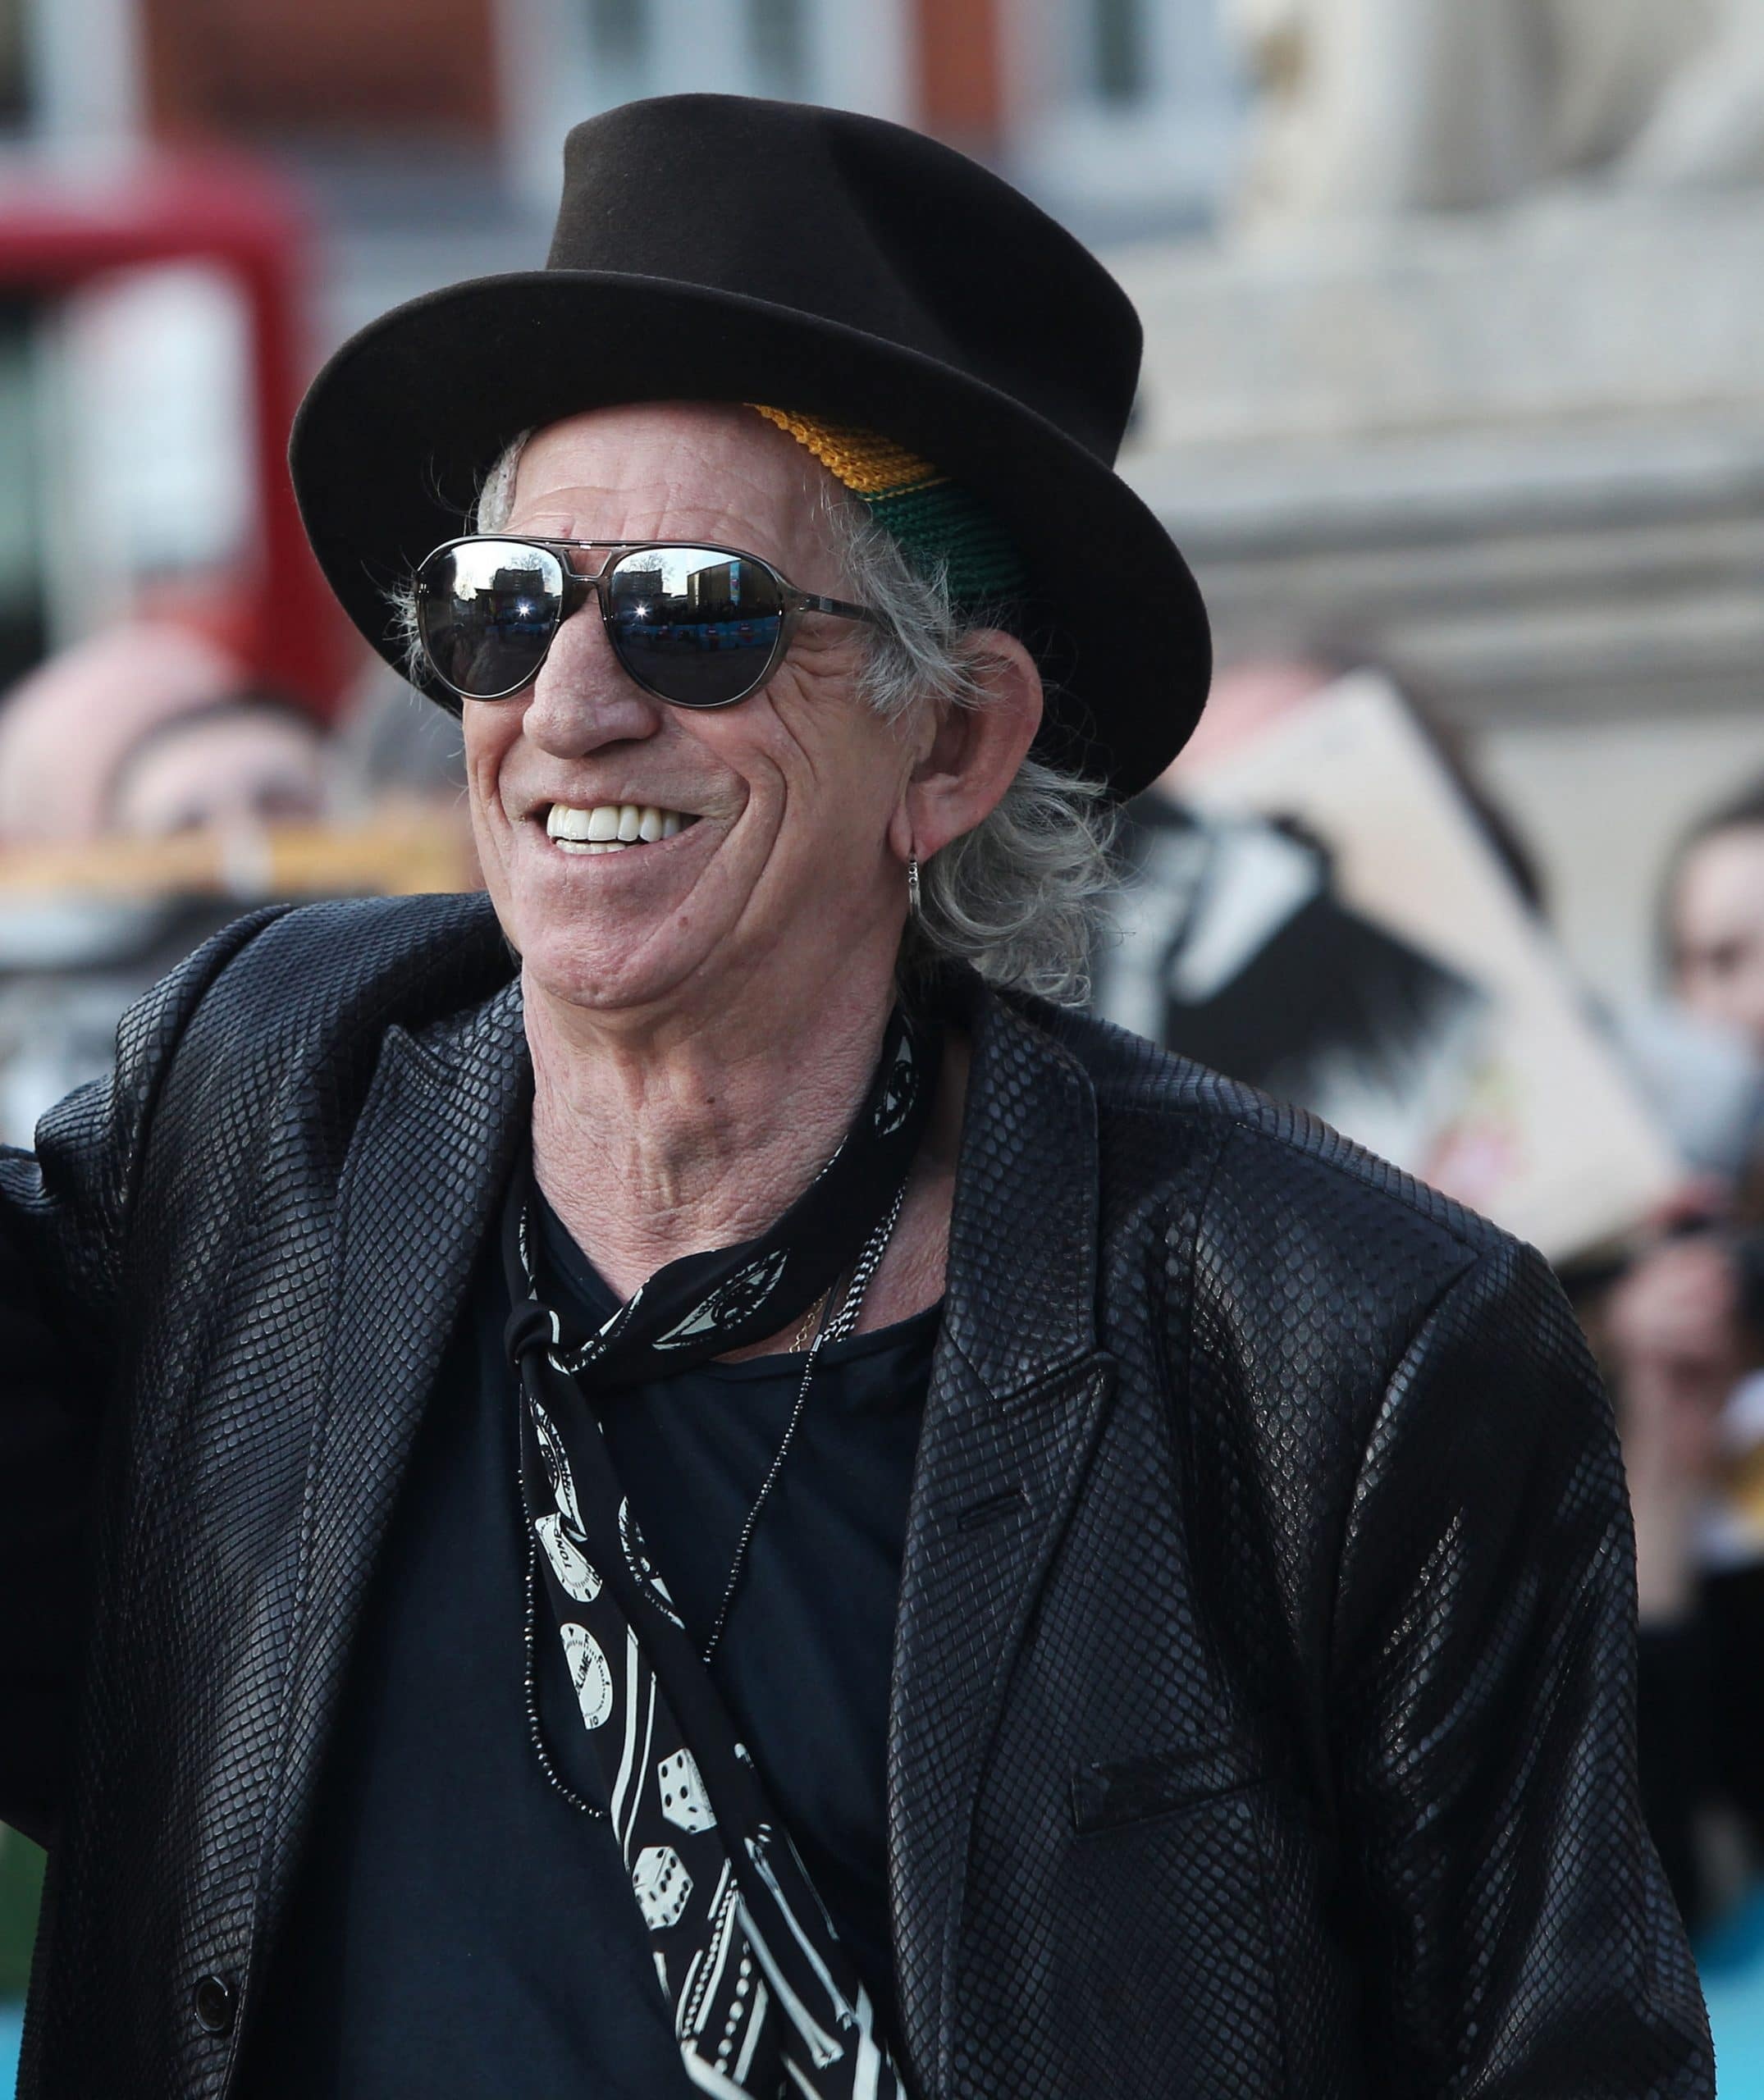 HD wallpaper, Keith Richards, 2150X2560 Hd Phone, Iphone Hd Keith Richards Wallpaper Image, Embracing The Chaos, Chaotic Life